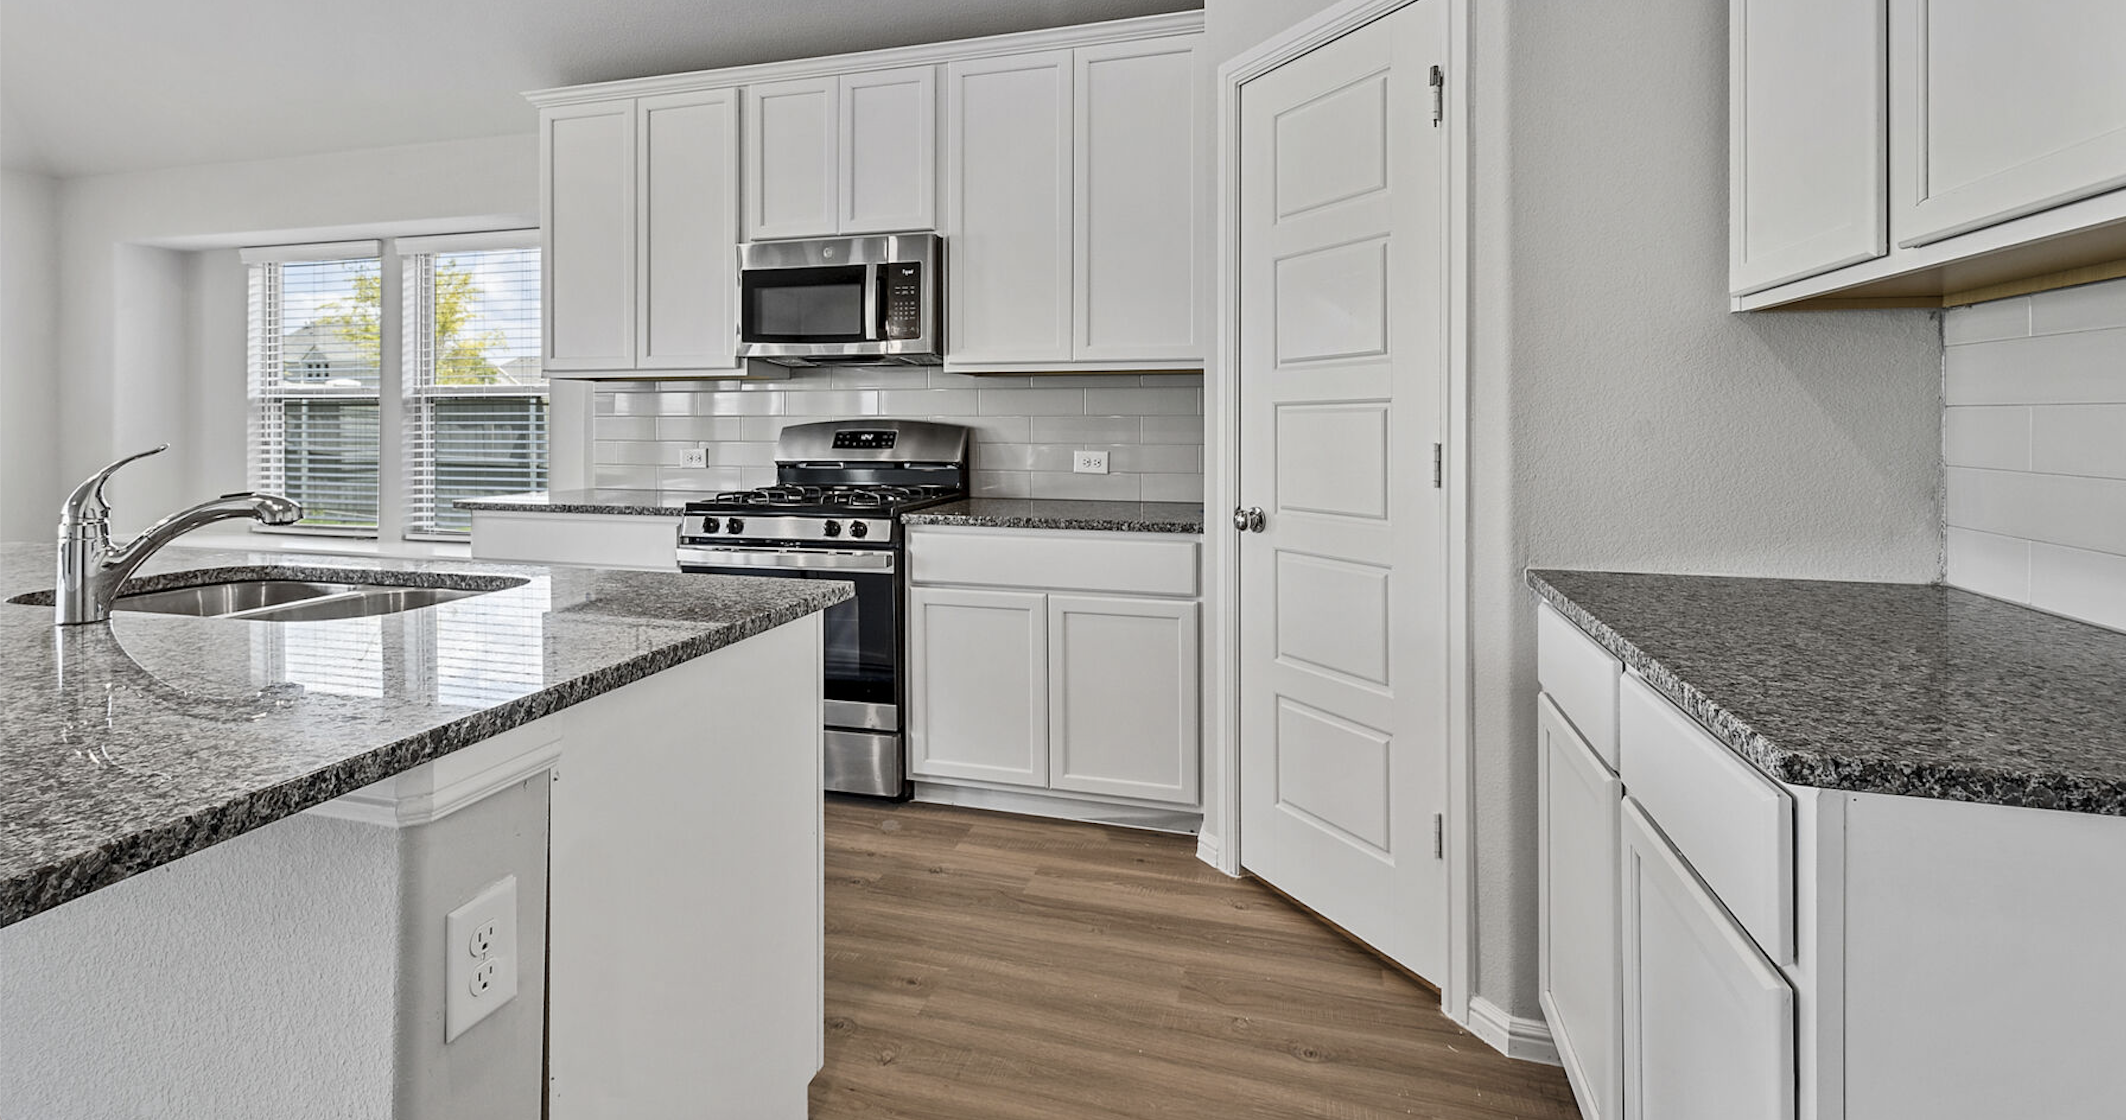 Modern kitchen in new homes in DFW with white cabinetry, stainless steel appliances, and granite countertops.